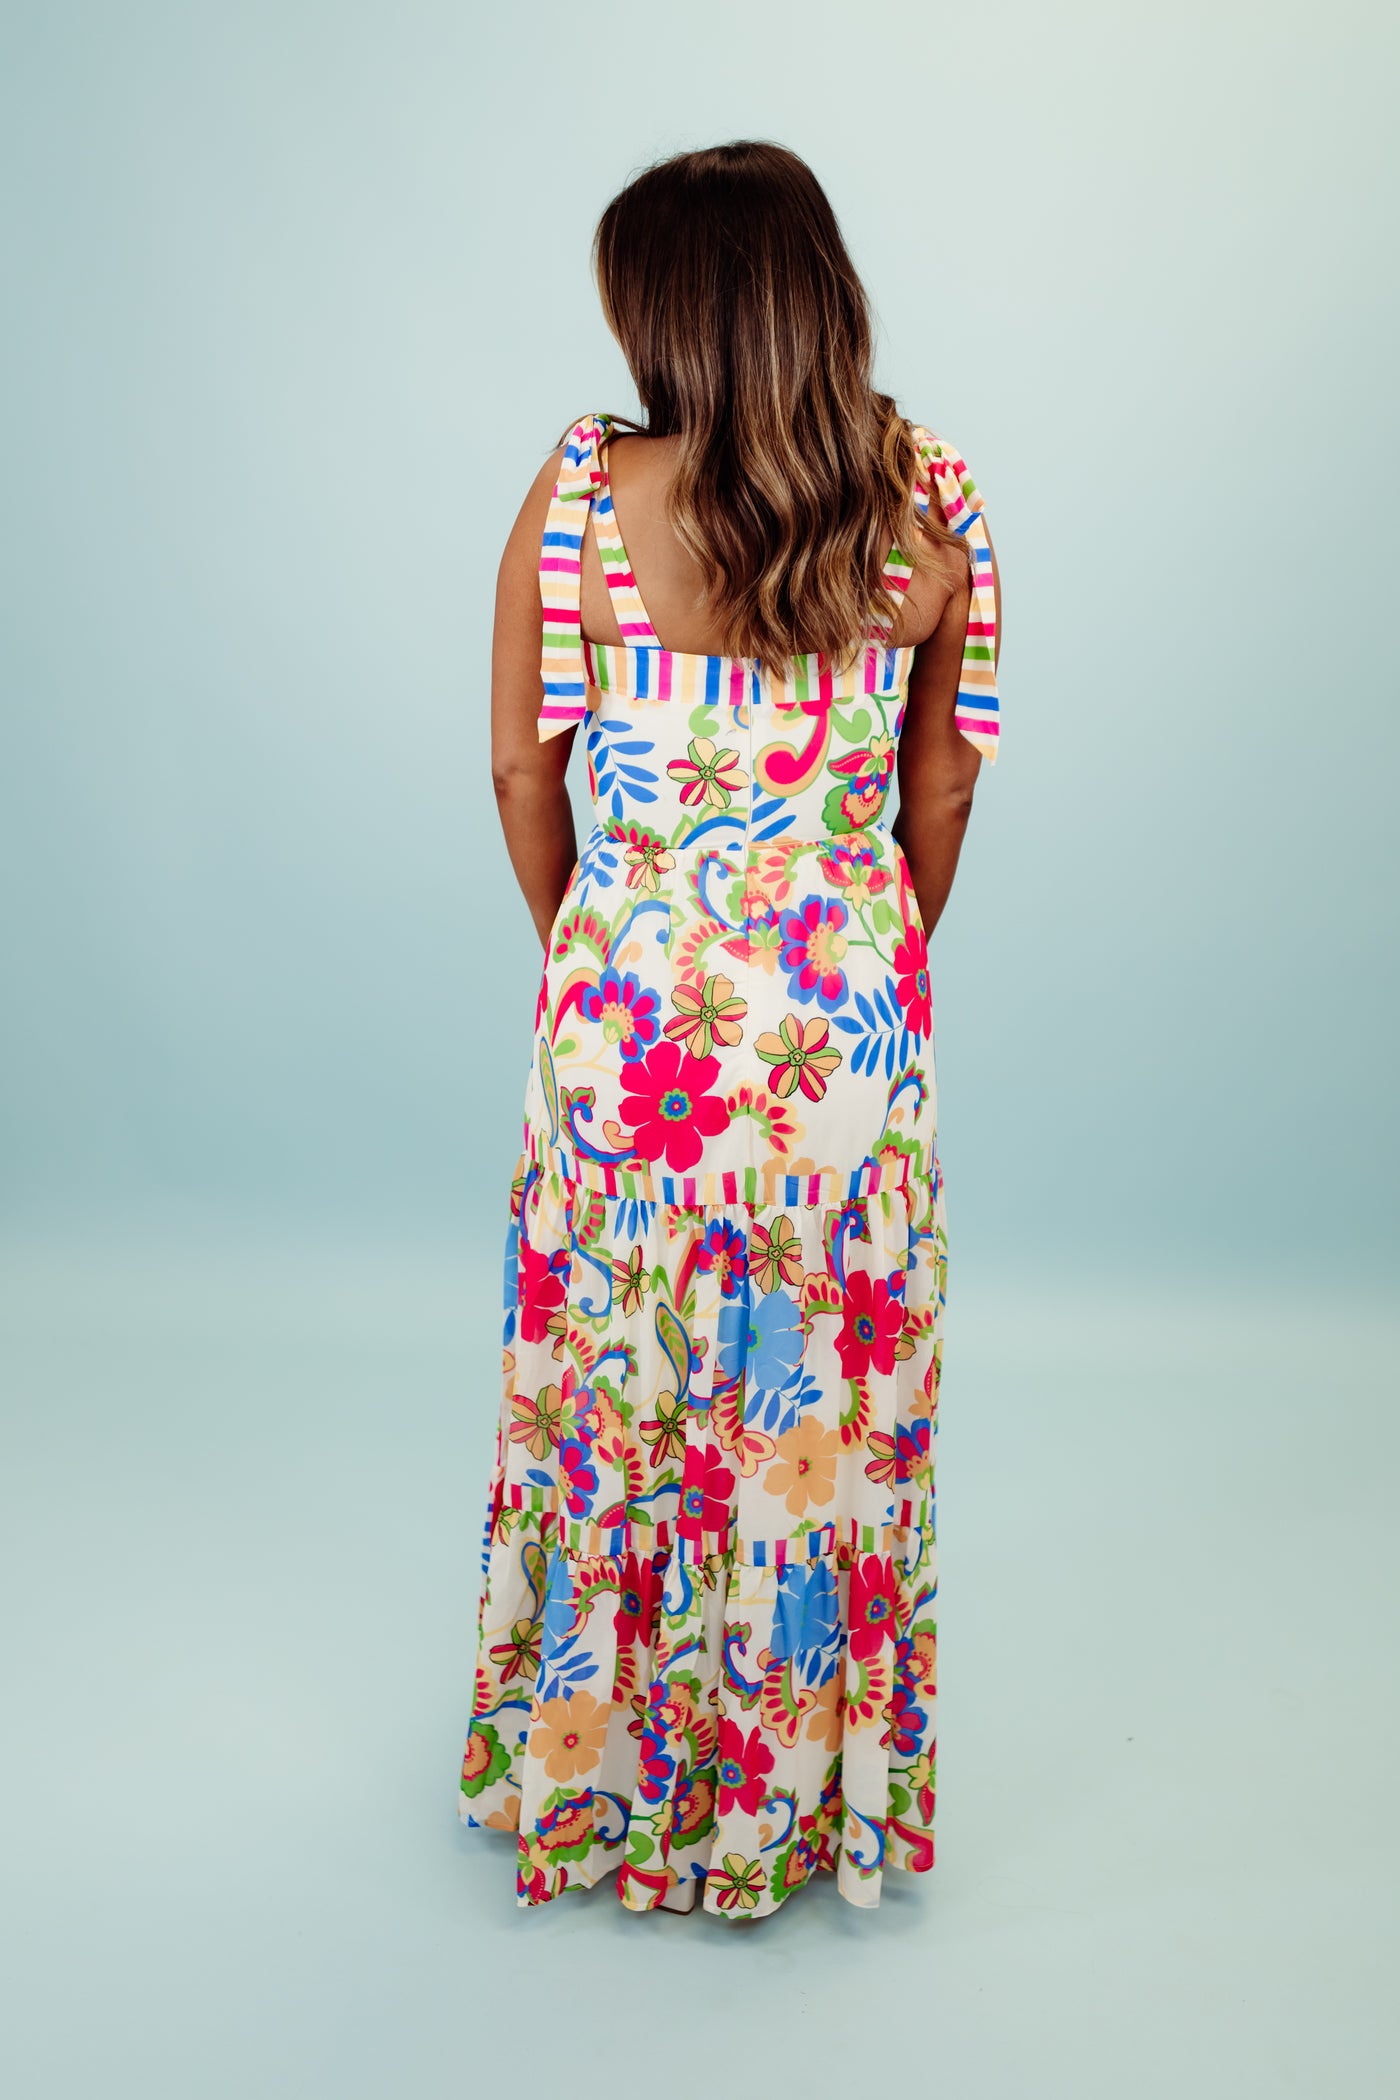 Ivory and Hot Pink Mix Floral Tie Sleeve Maxi Dress